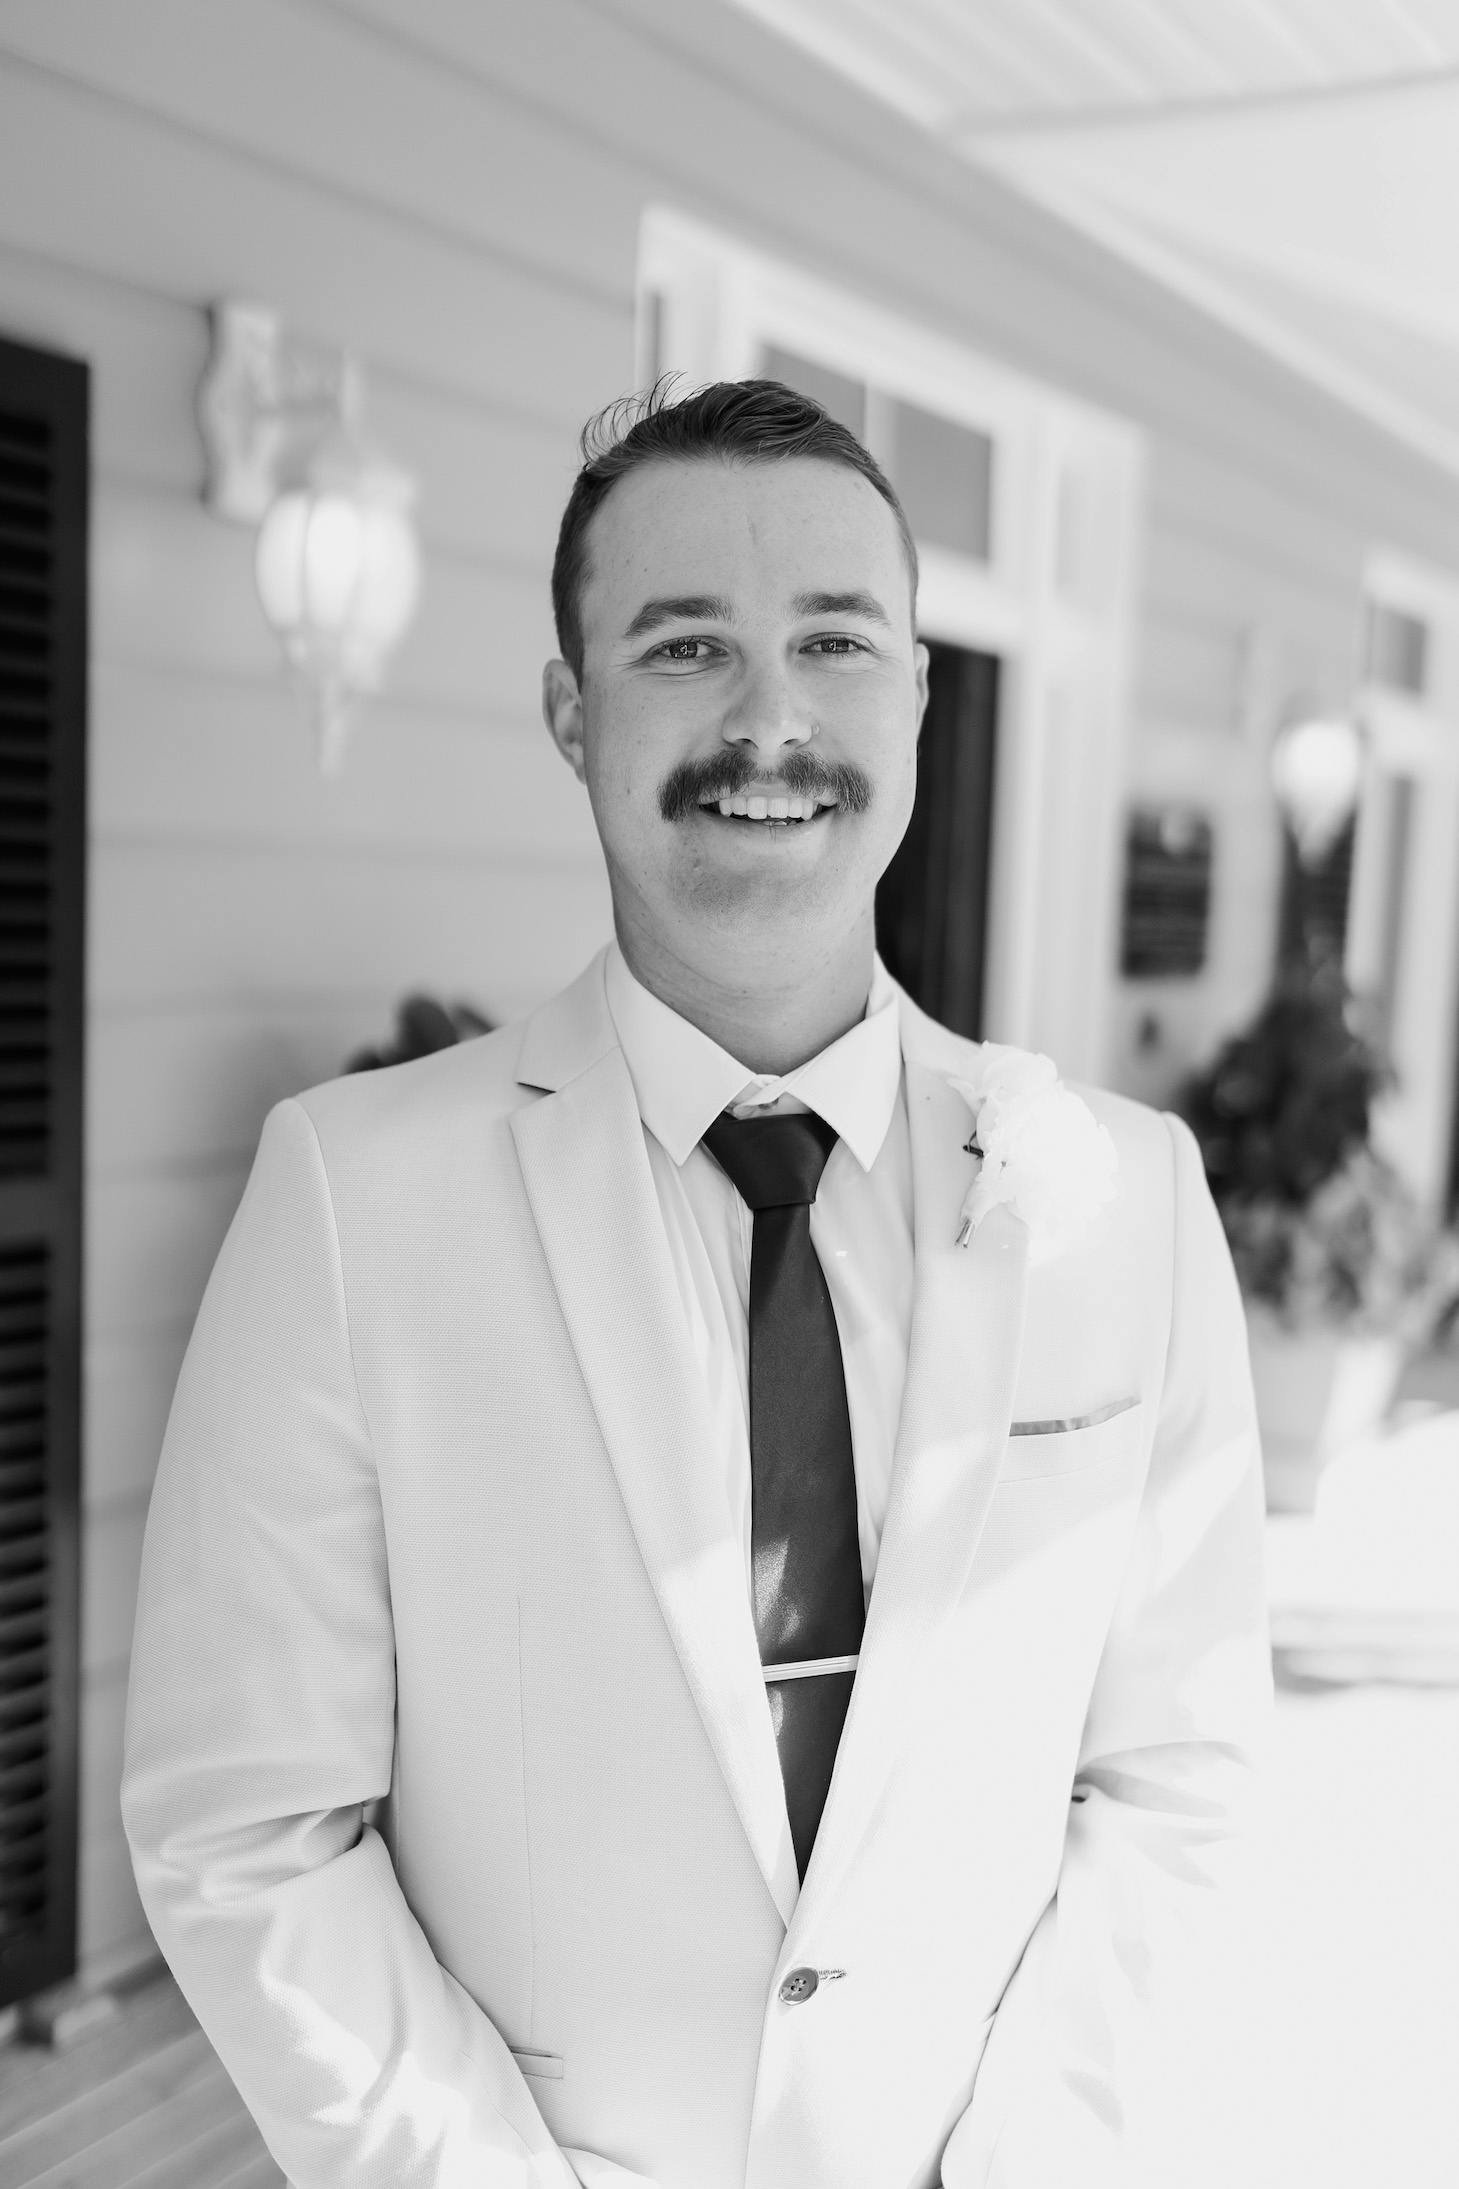 A man dressed in a light-colored suit with a dark tie and a boutonniere smiles at the camera. He has a mustache and is standing outside a building with siding and windows. The photo is in black and white.